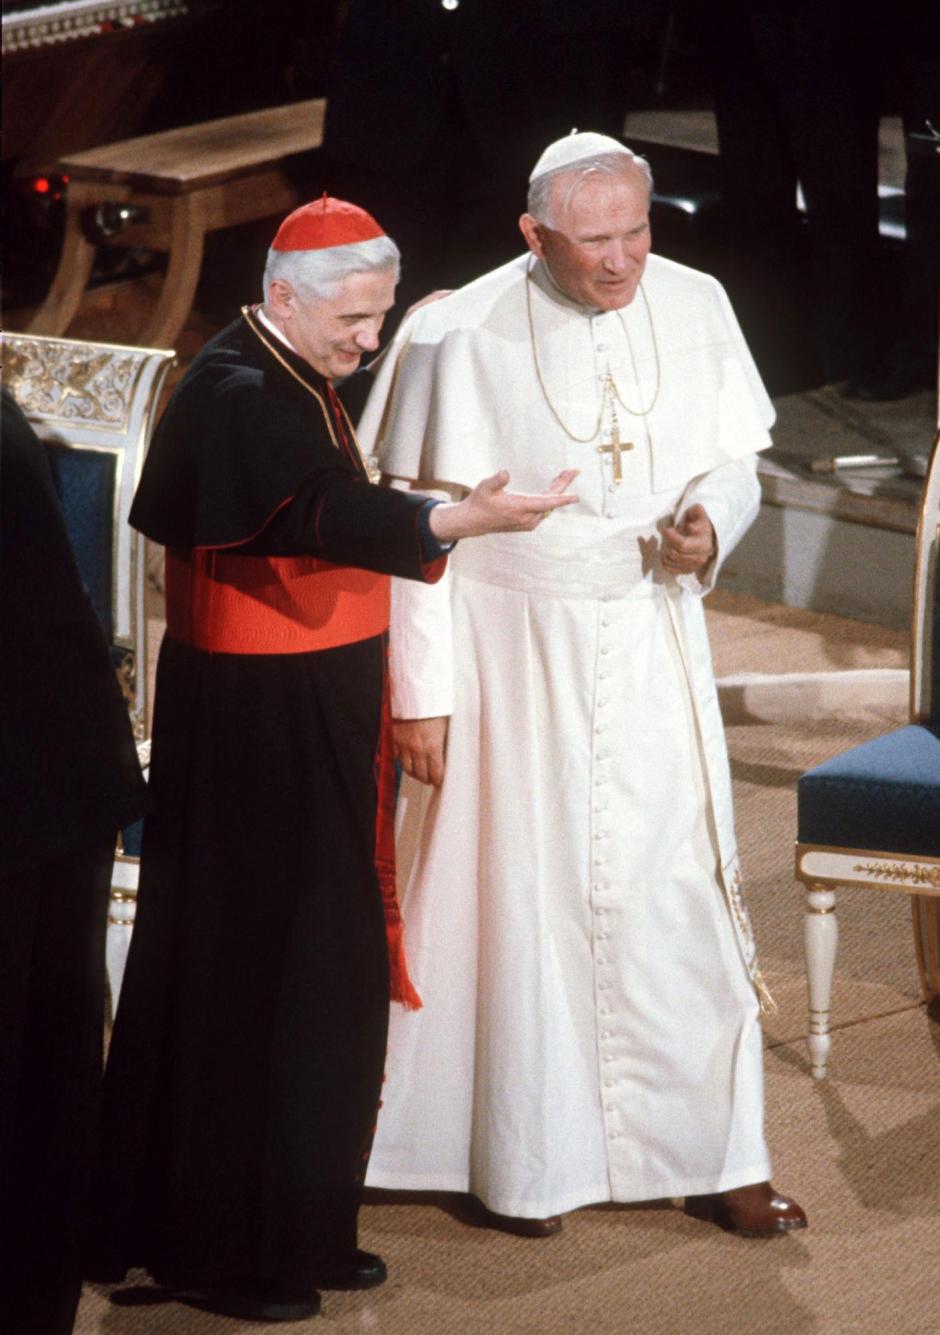 EL PAPA JUAN PABLO II JUNTO AL CARDENAL JOSEPH RATZINGER ( PAPA BENEDICTO XVI ) DURANTE UNA VISITA OFICIAL A ALEMANIA
ACTION PRESS / MITTELSTEINER / ©KORPA
14/11/1980
COLONIA *** Local Caption *** ACTION PRESS / MITTELSTEINER #05010004#
THE NEW POPE BENEDICT XVI
FILE PHOTO: JOSEPH CARDINAL RATZINGER TOGETHER WITH POPE GUISEPPE PAOLO II AT COLOGNE IN GERMANY ON NOV 14TH 1980.